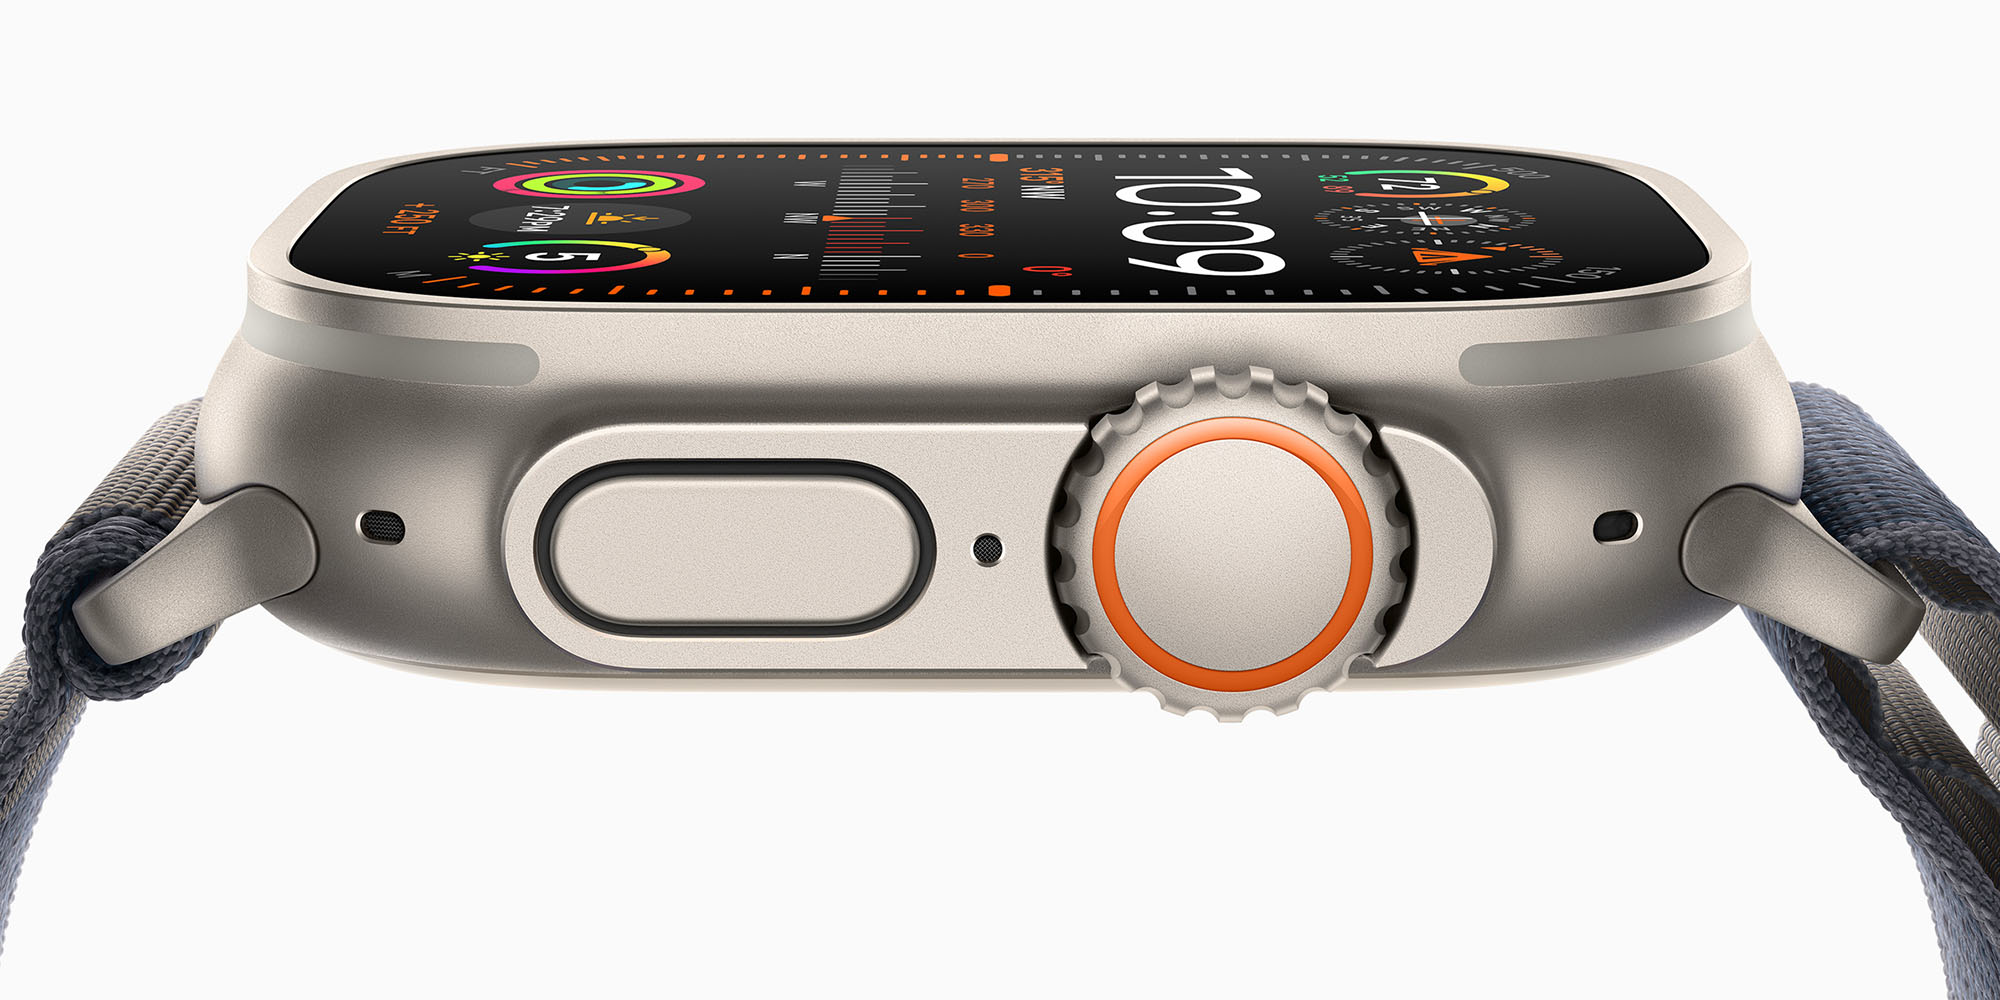 Apple reportedly plans to add blood pressure monitoring to the Apple Watch.